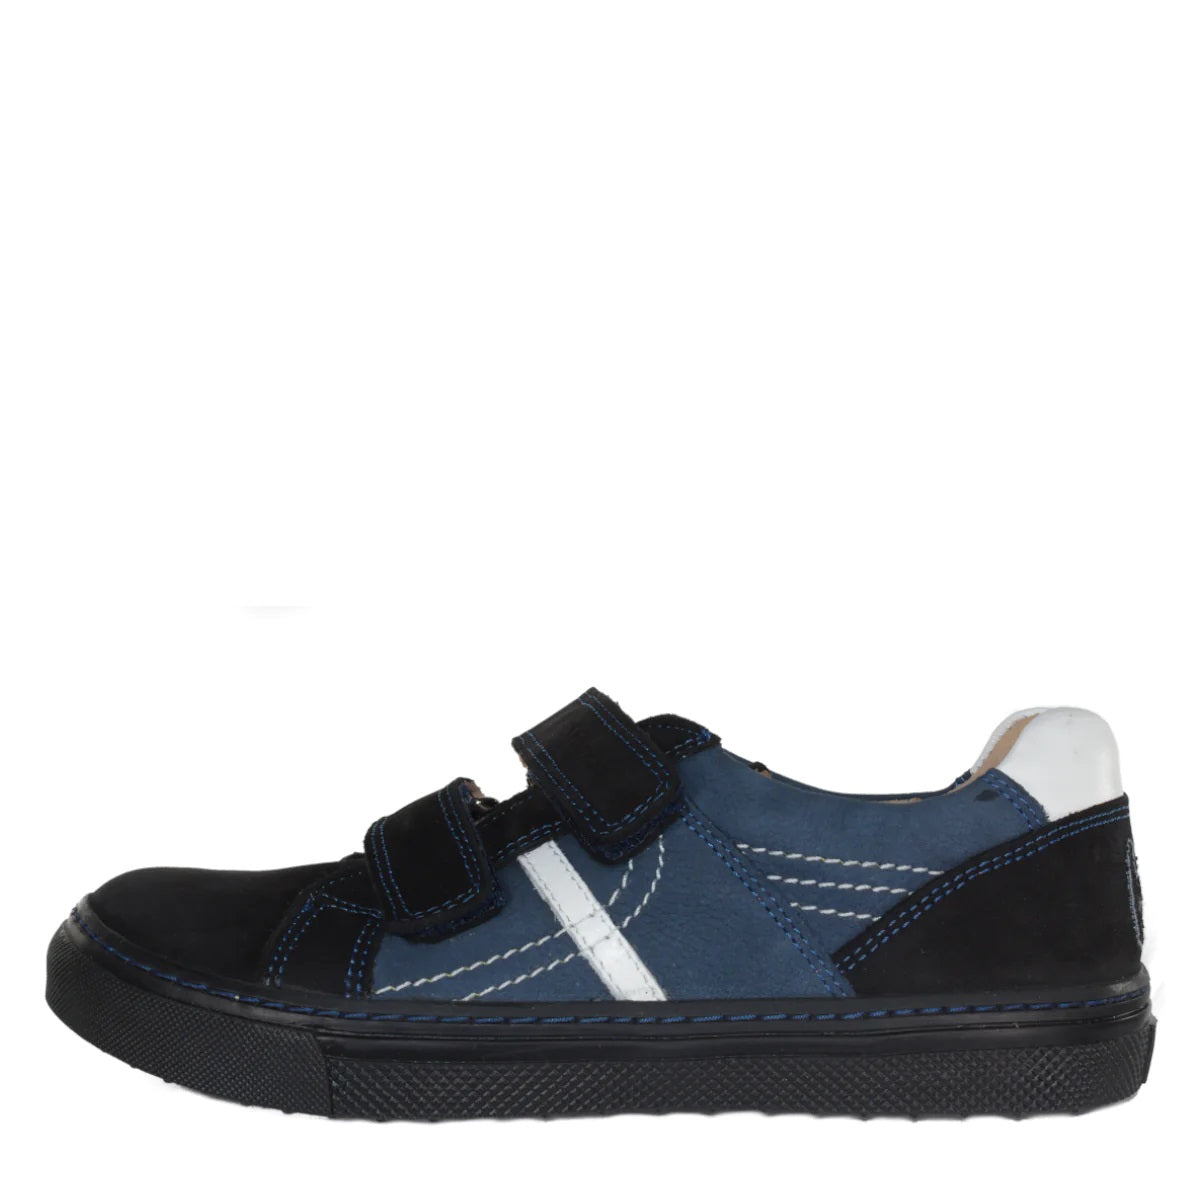 Szamos kid boy sneakers in blue and black color with double velcro strap big kid size